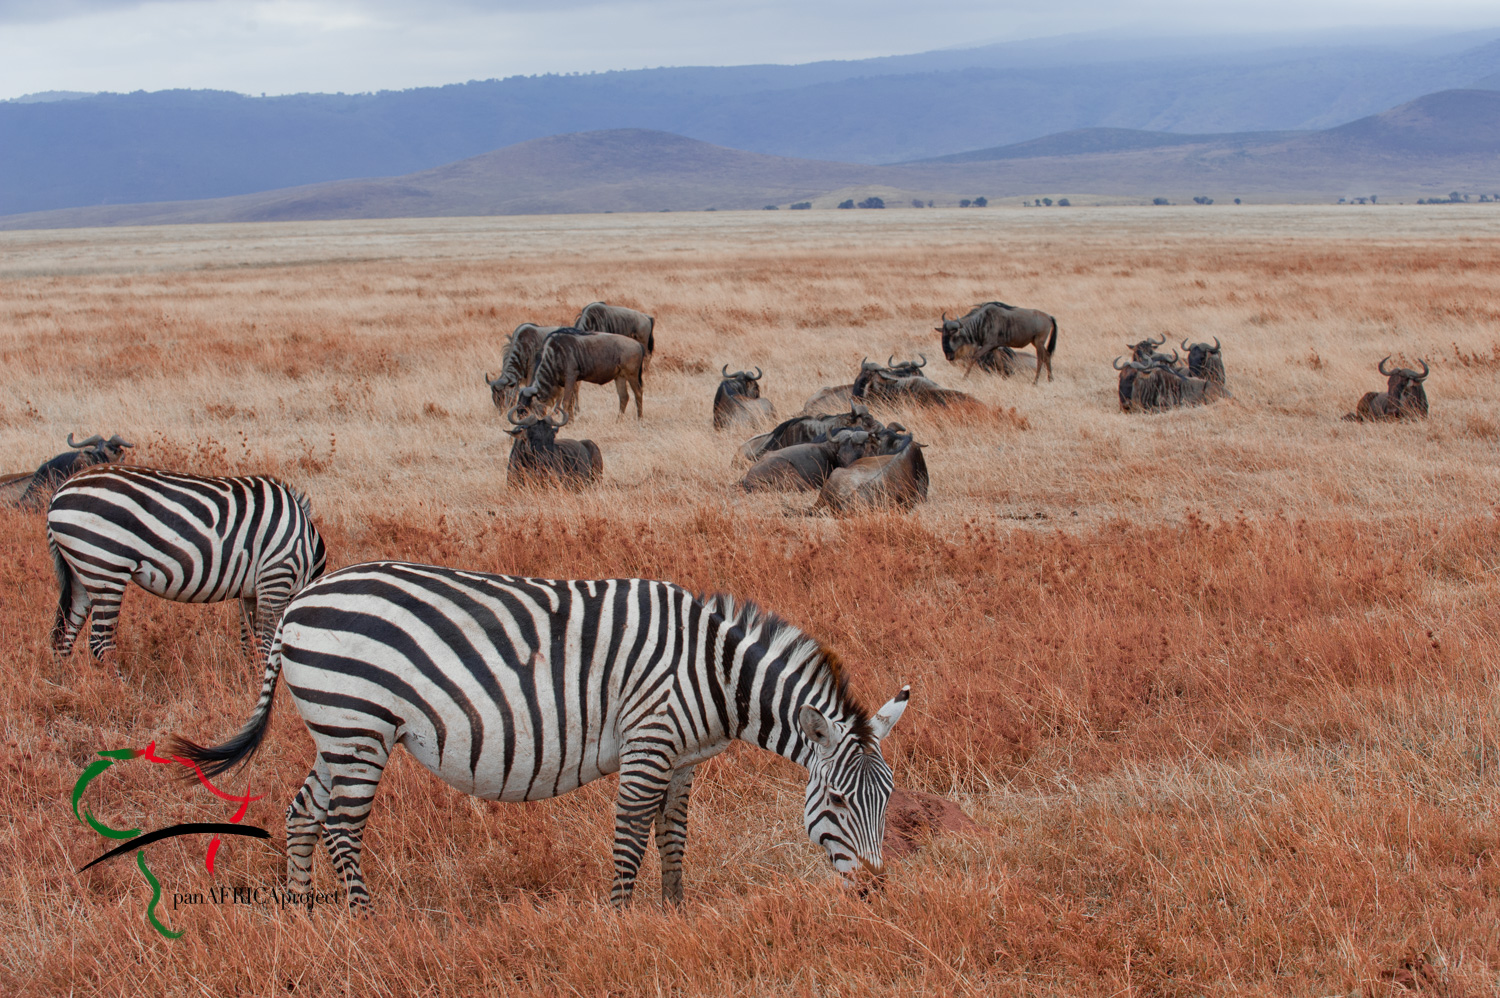 Two zebras in front of a group of wildebeasts